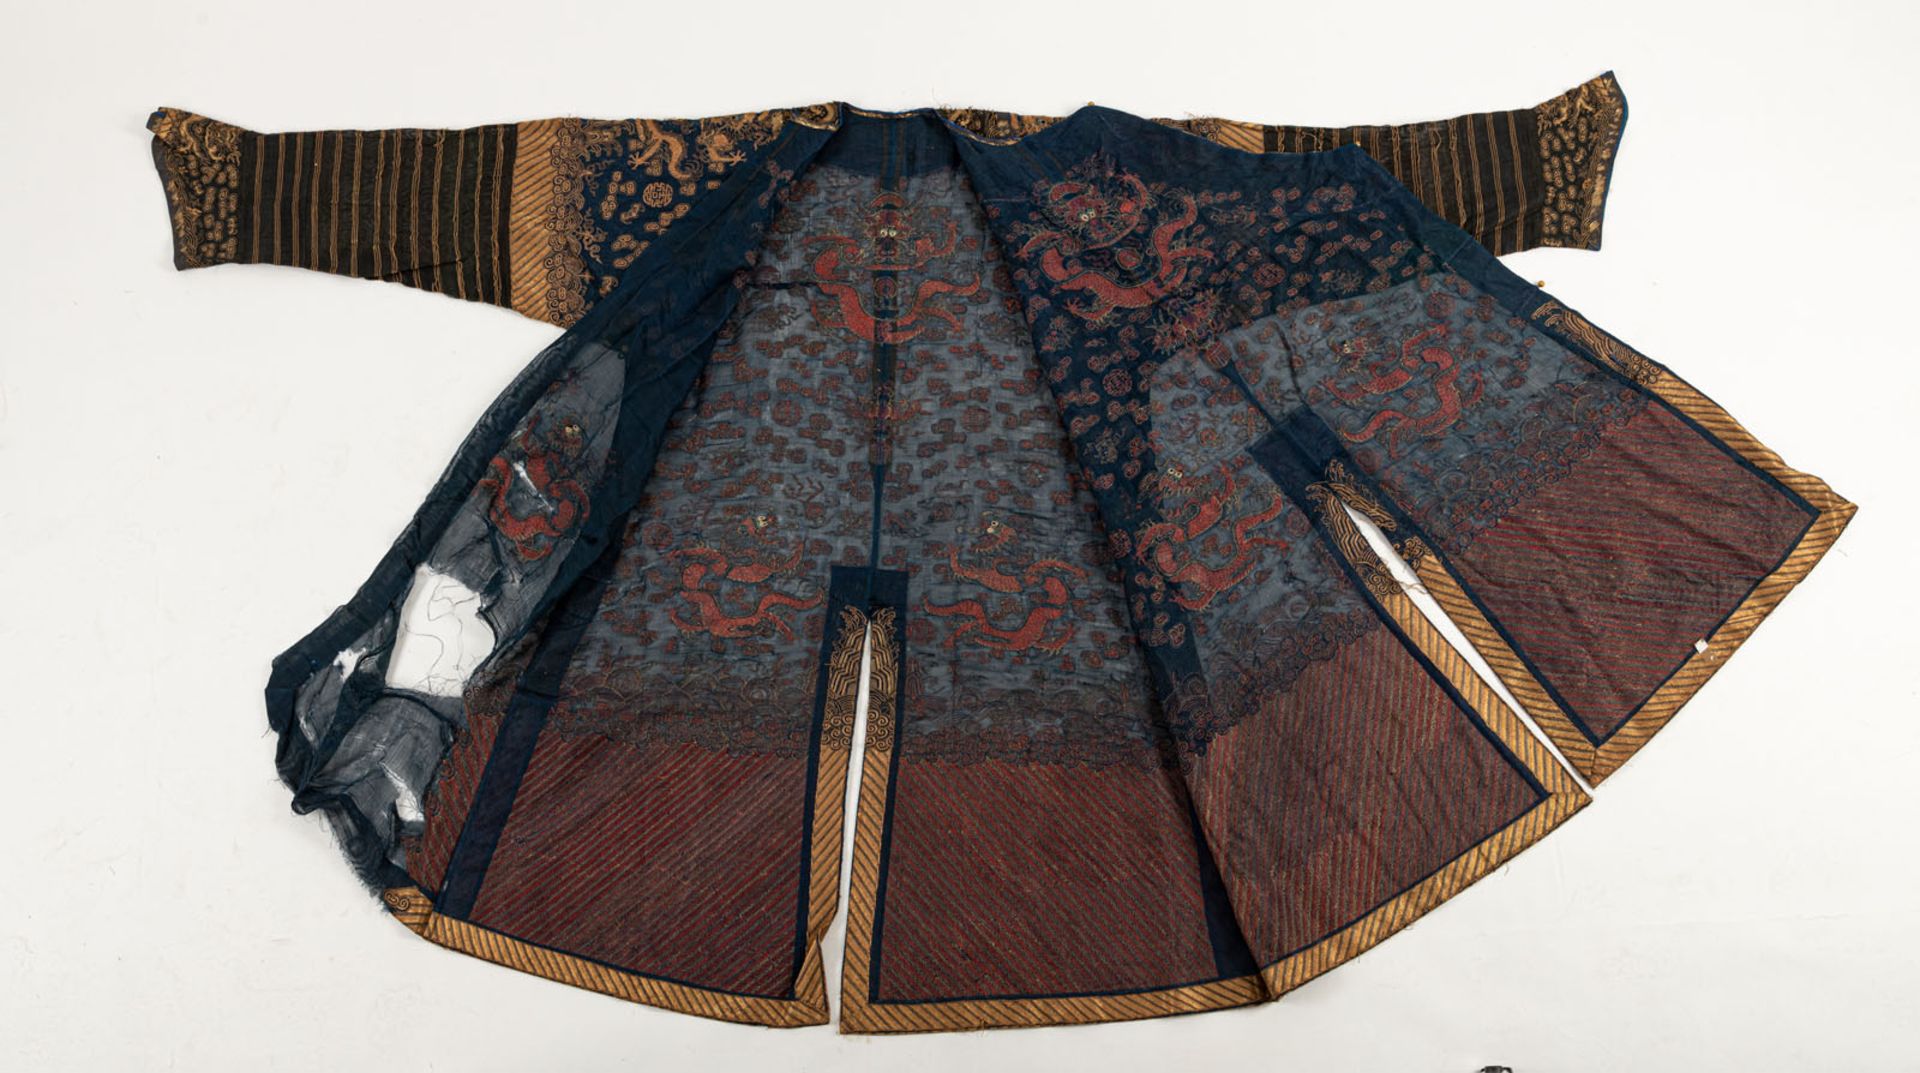 NAVY BLUE DRAGON ROBE (JIFU) IN SHA AND GOLD EMBROIDERY FOR A GENTLEMAN - Image 6 of 8